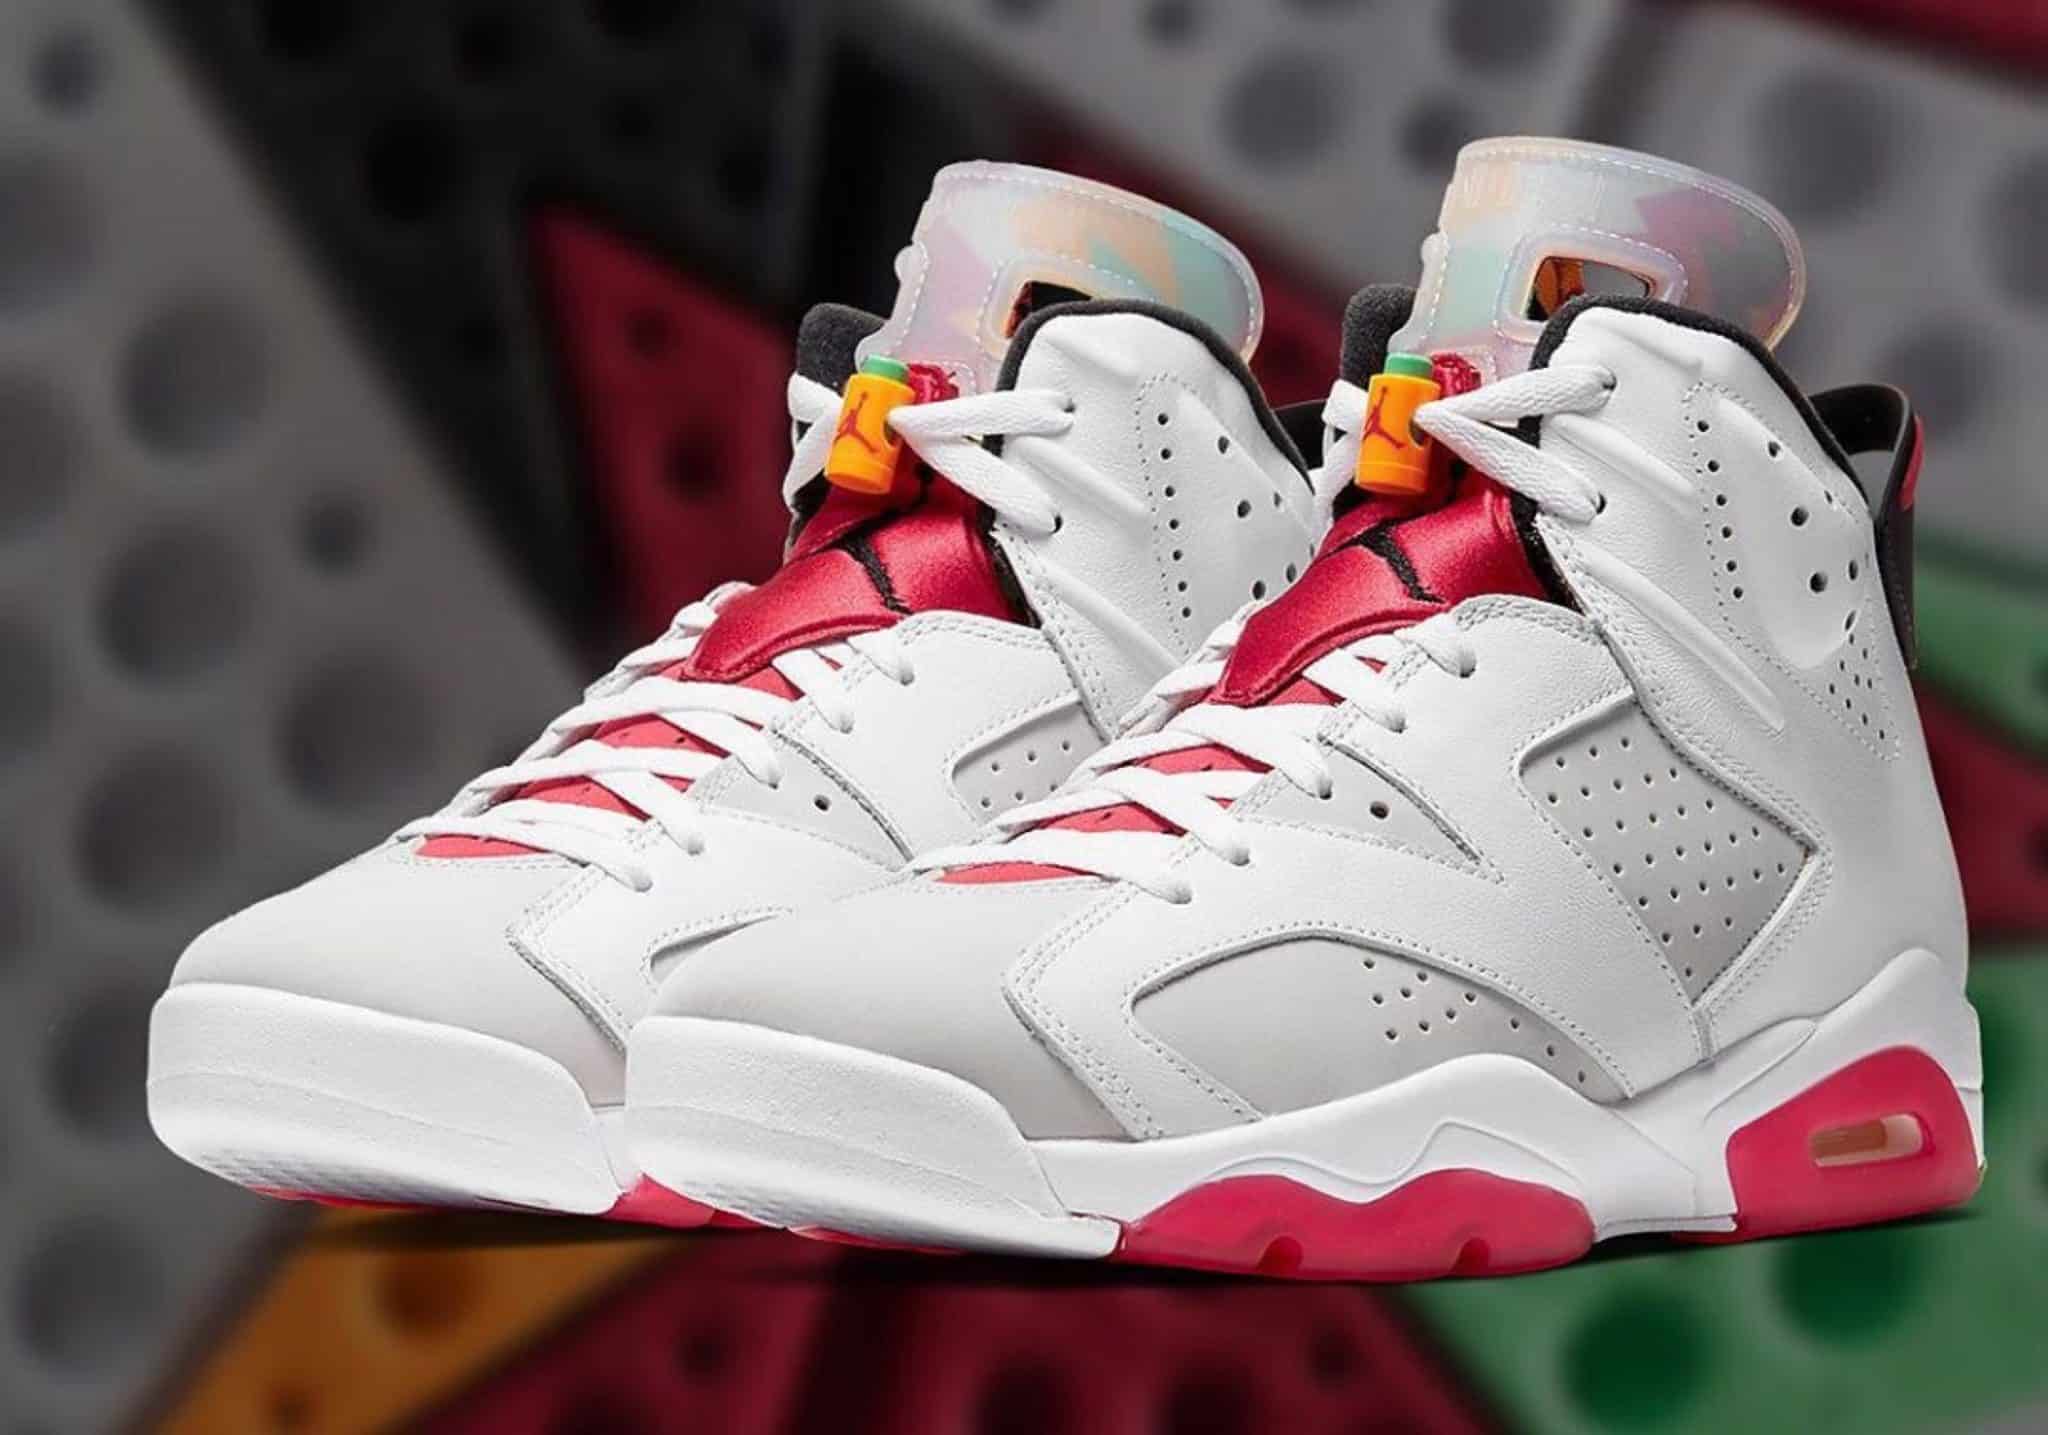 “Hares” Return with the iconic Air Jordan 6